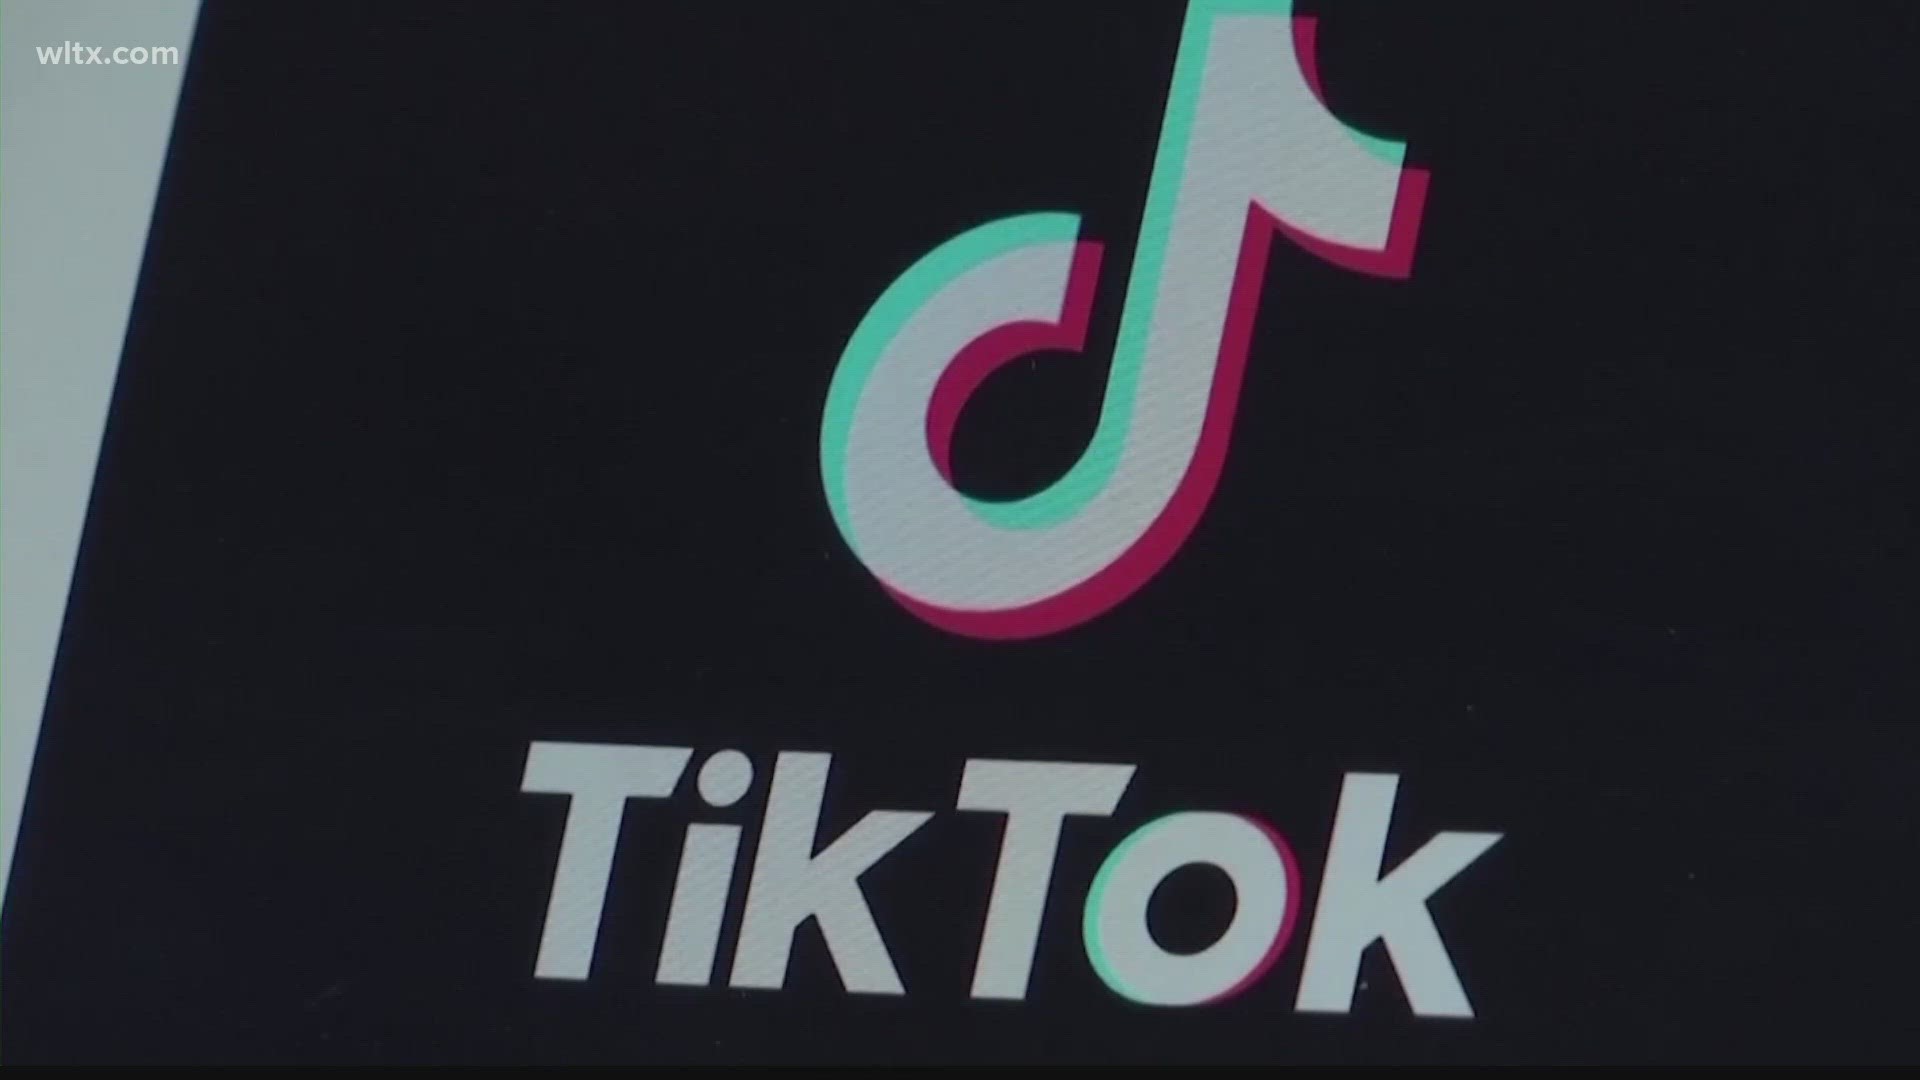 Congress is considering a ban on TikTok. So if that were to happen, what would the future of the social media platform look like?